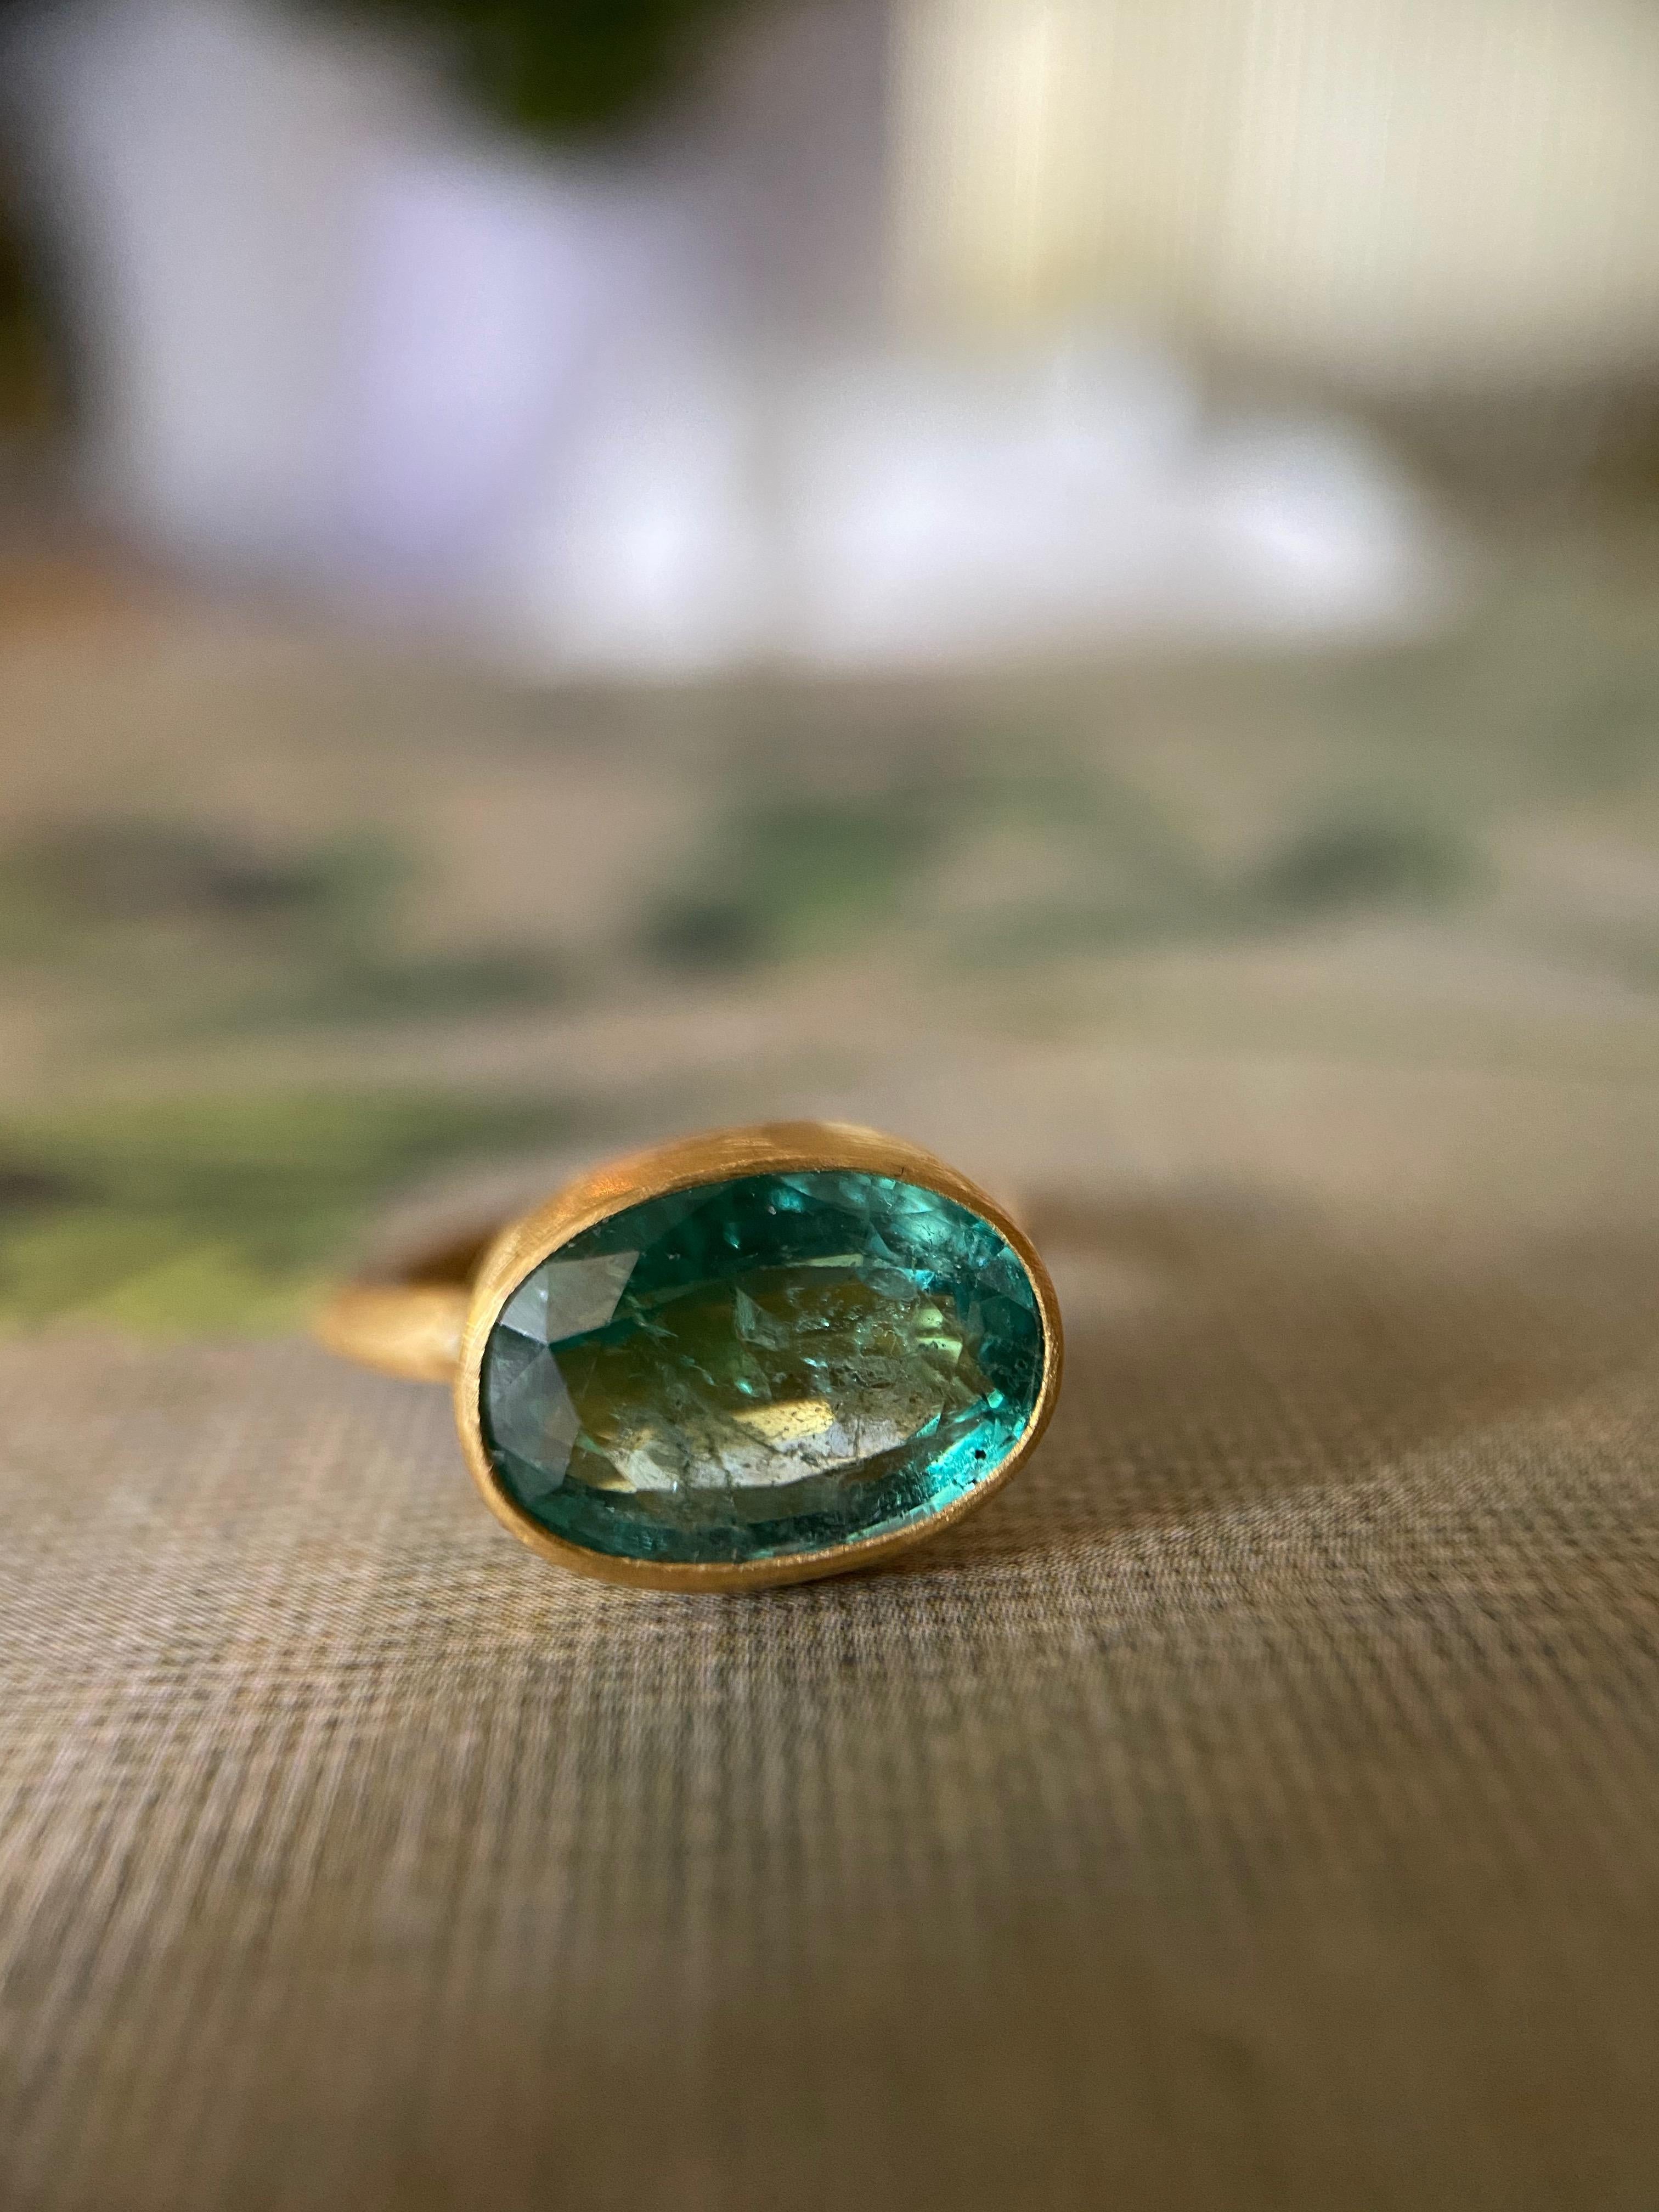 Oval Cut Margery Hirschey 22 Karat Gold Ring with 5.09 Carat Oval Emerald